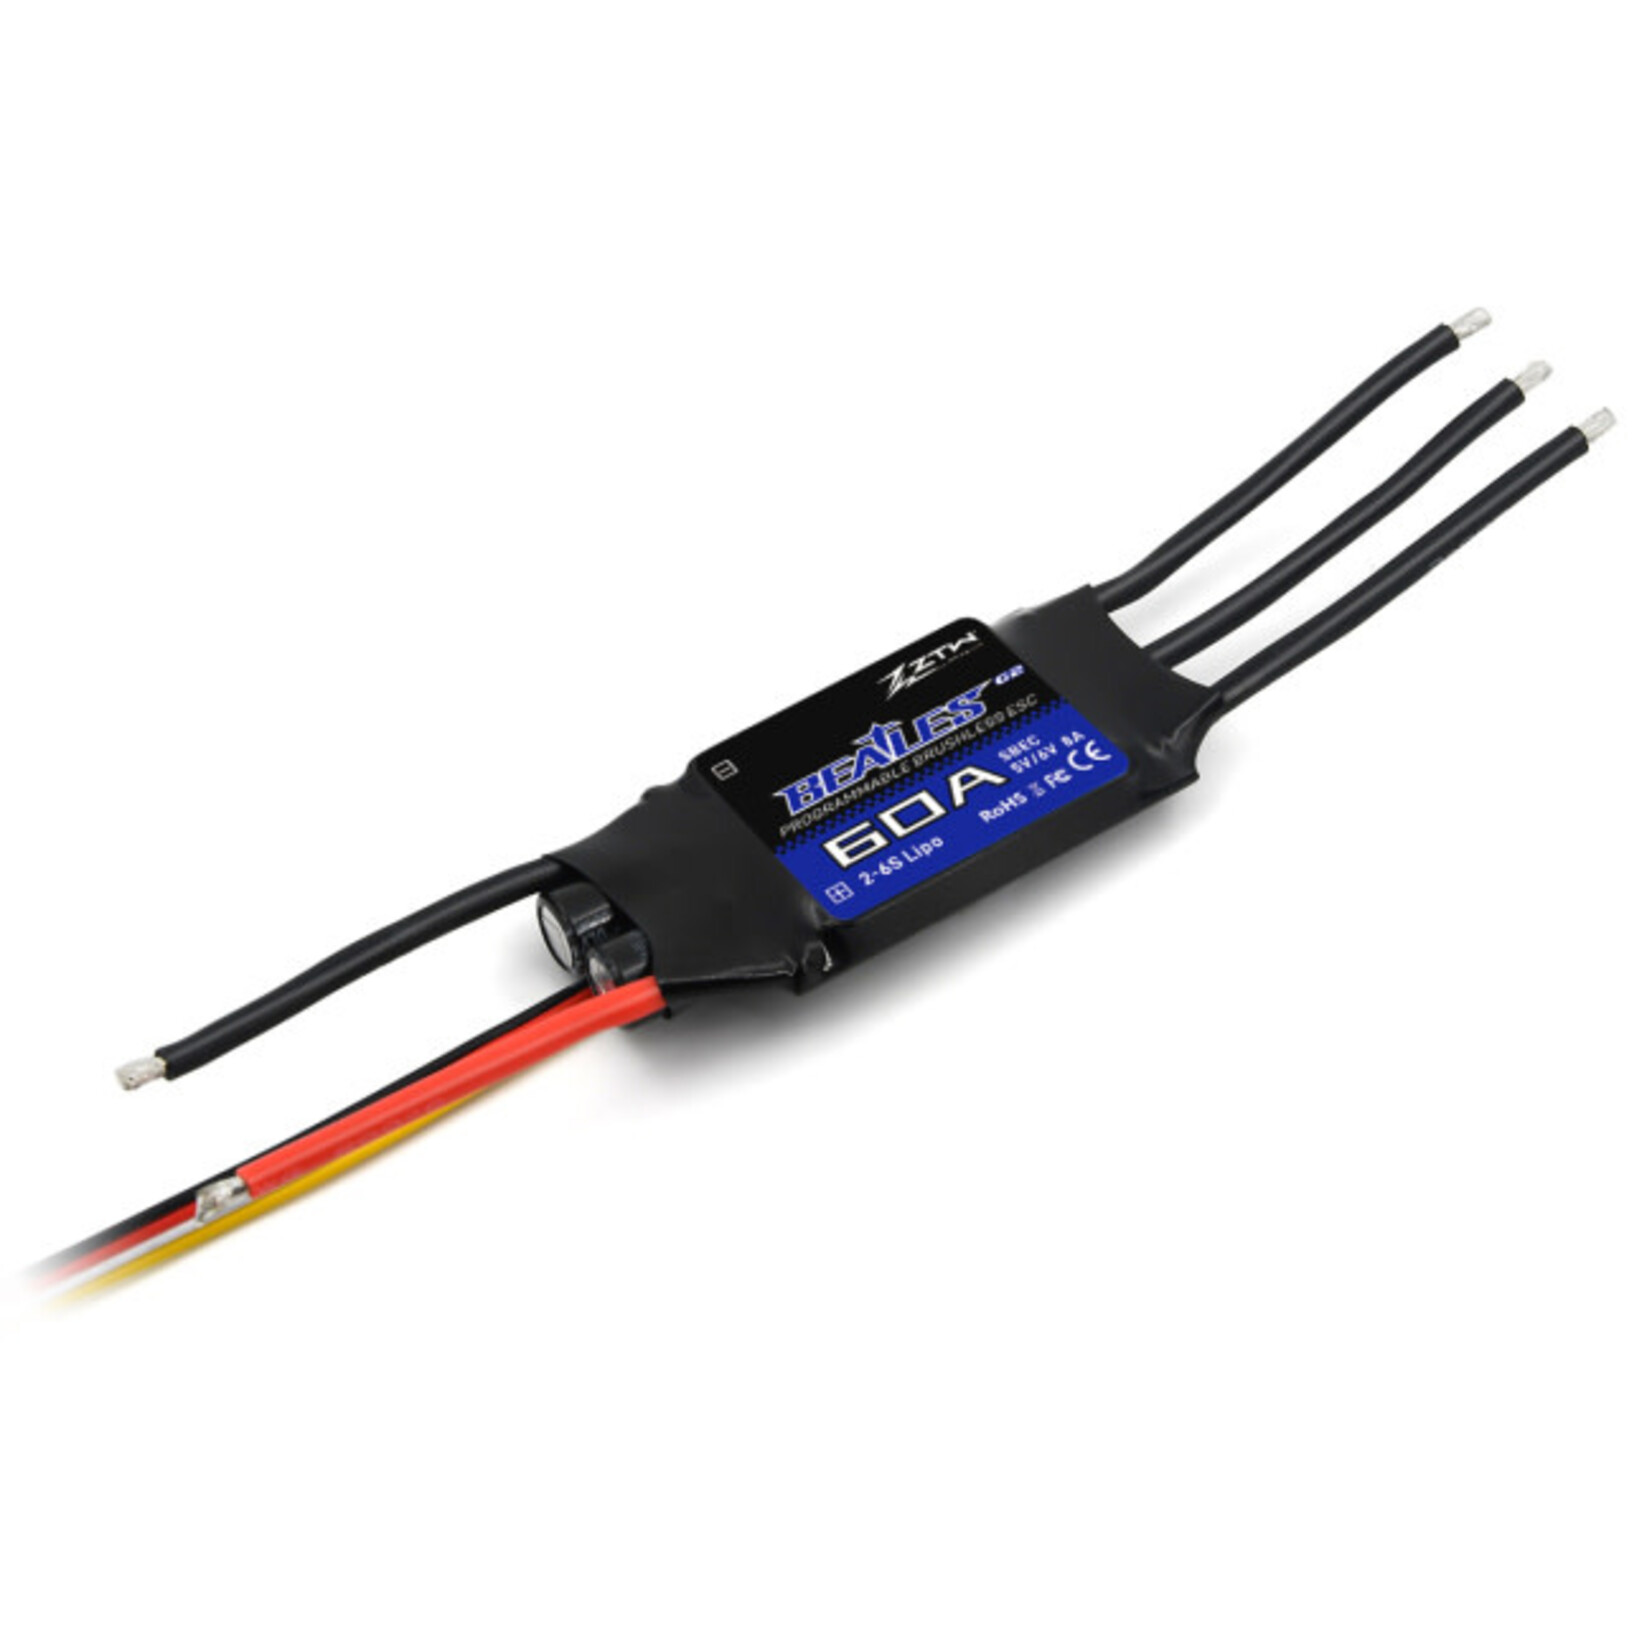 ZTW Technology 60A G2 Series Brushless ESC for RC Planes